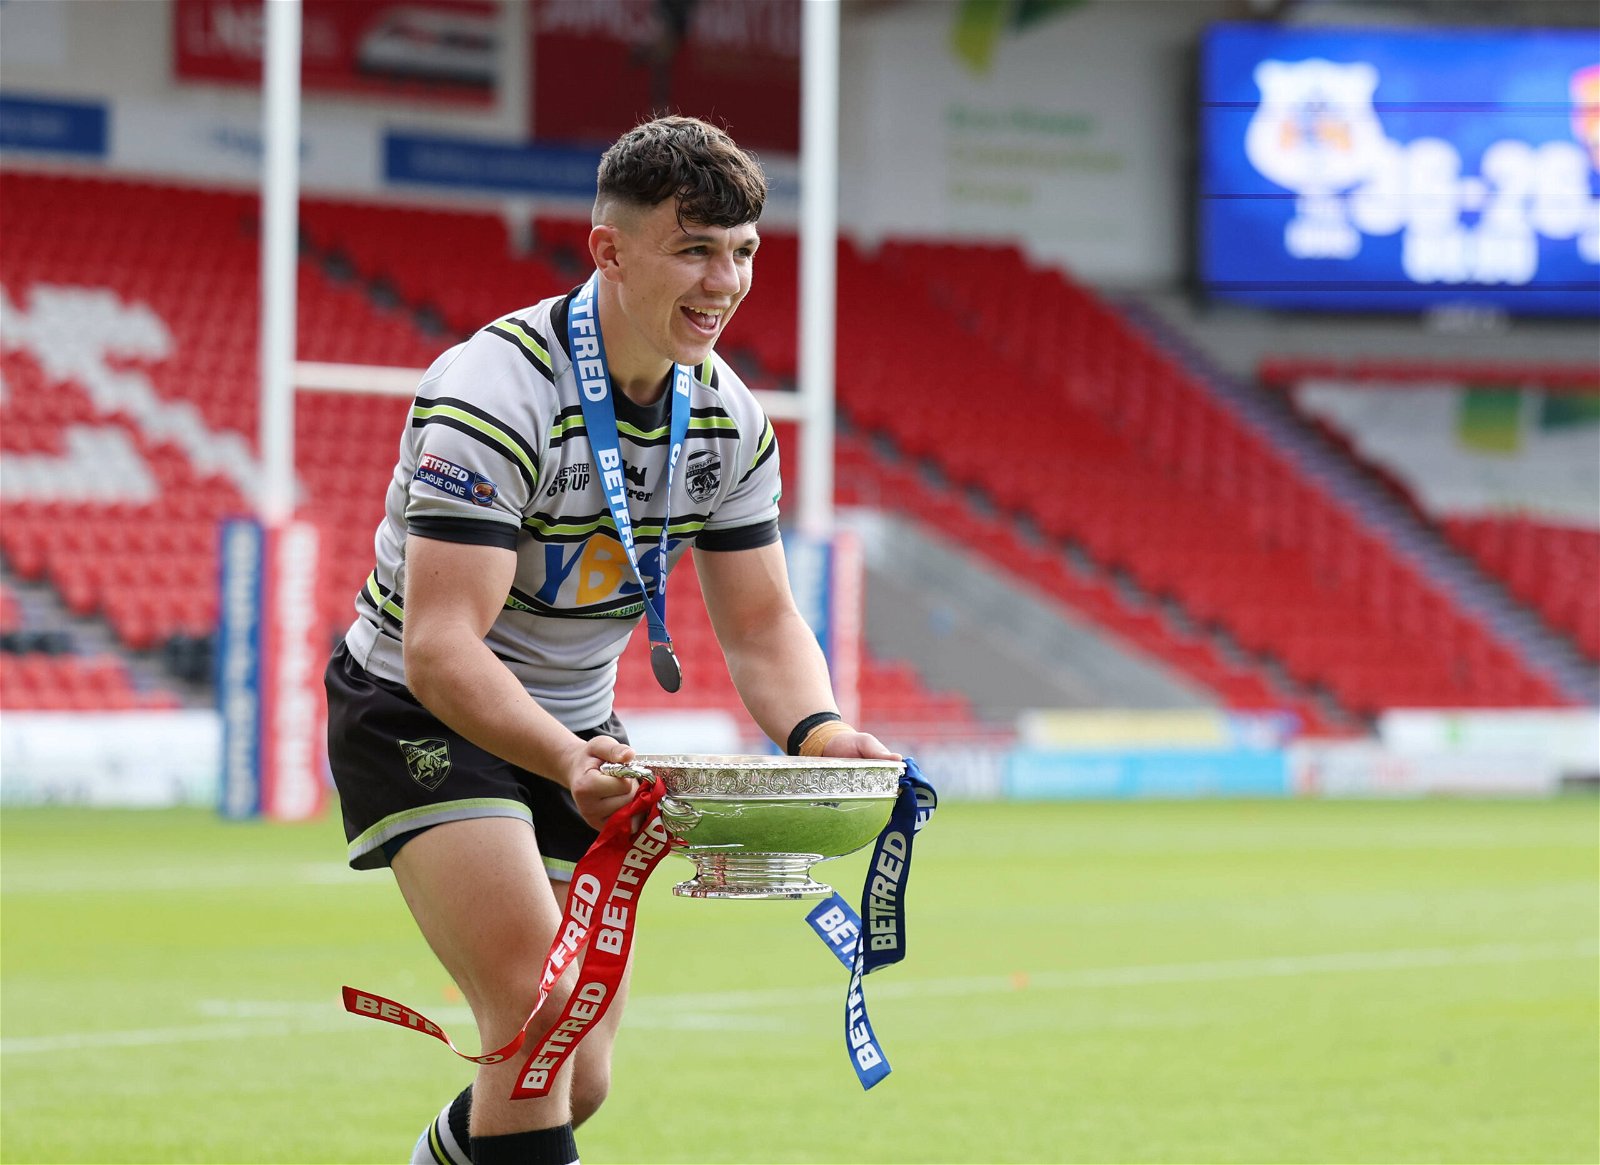 London Broncos have signed Reiss Butterworth